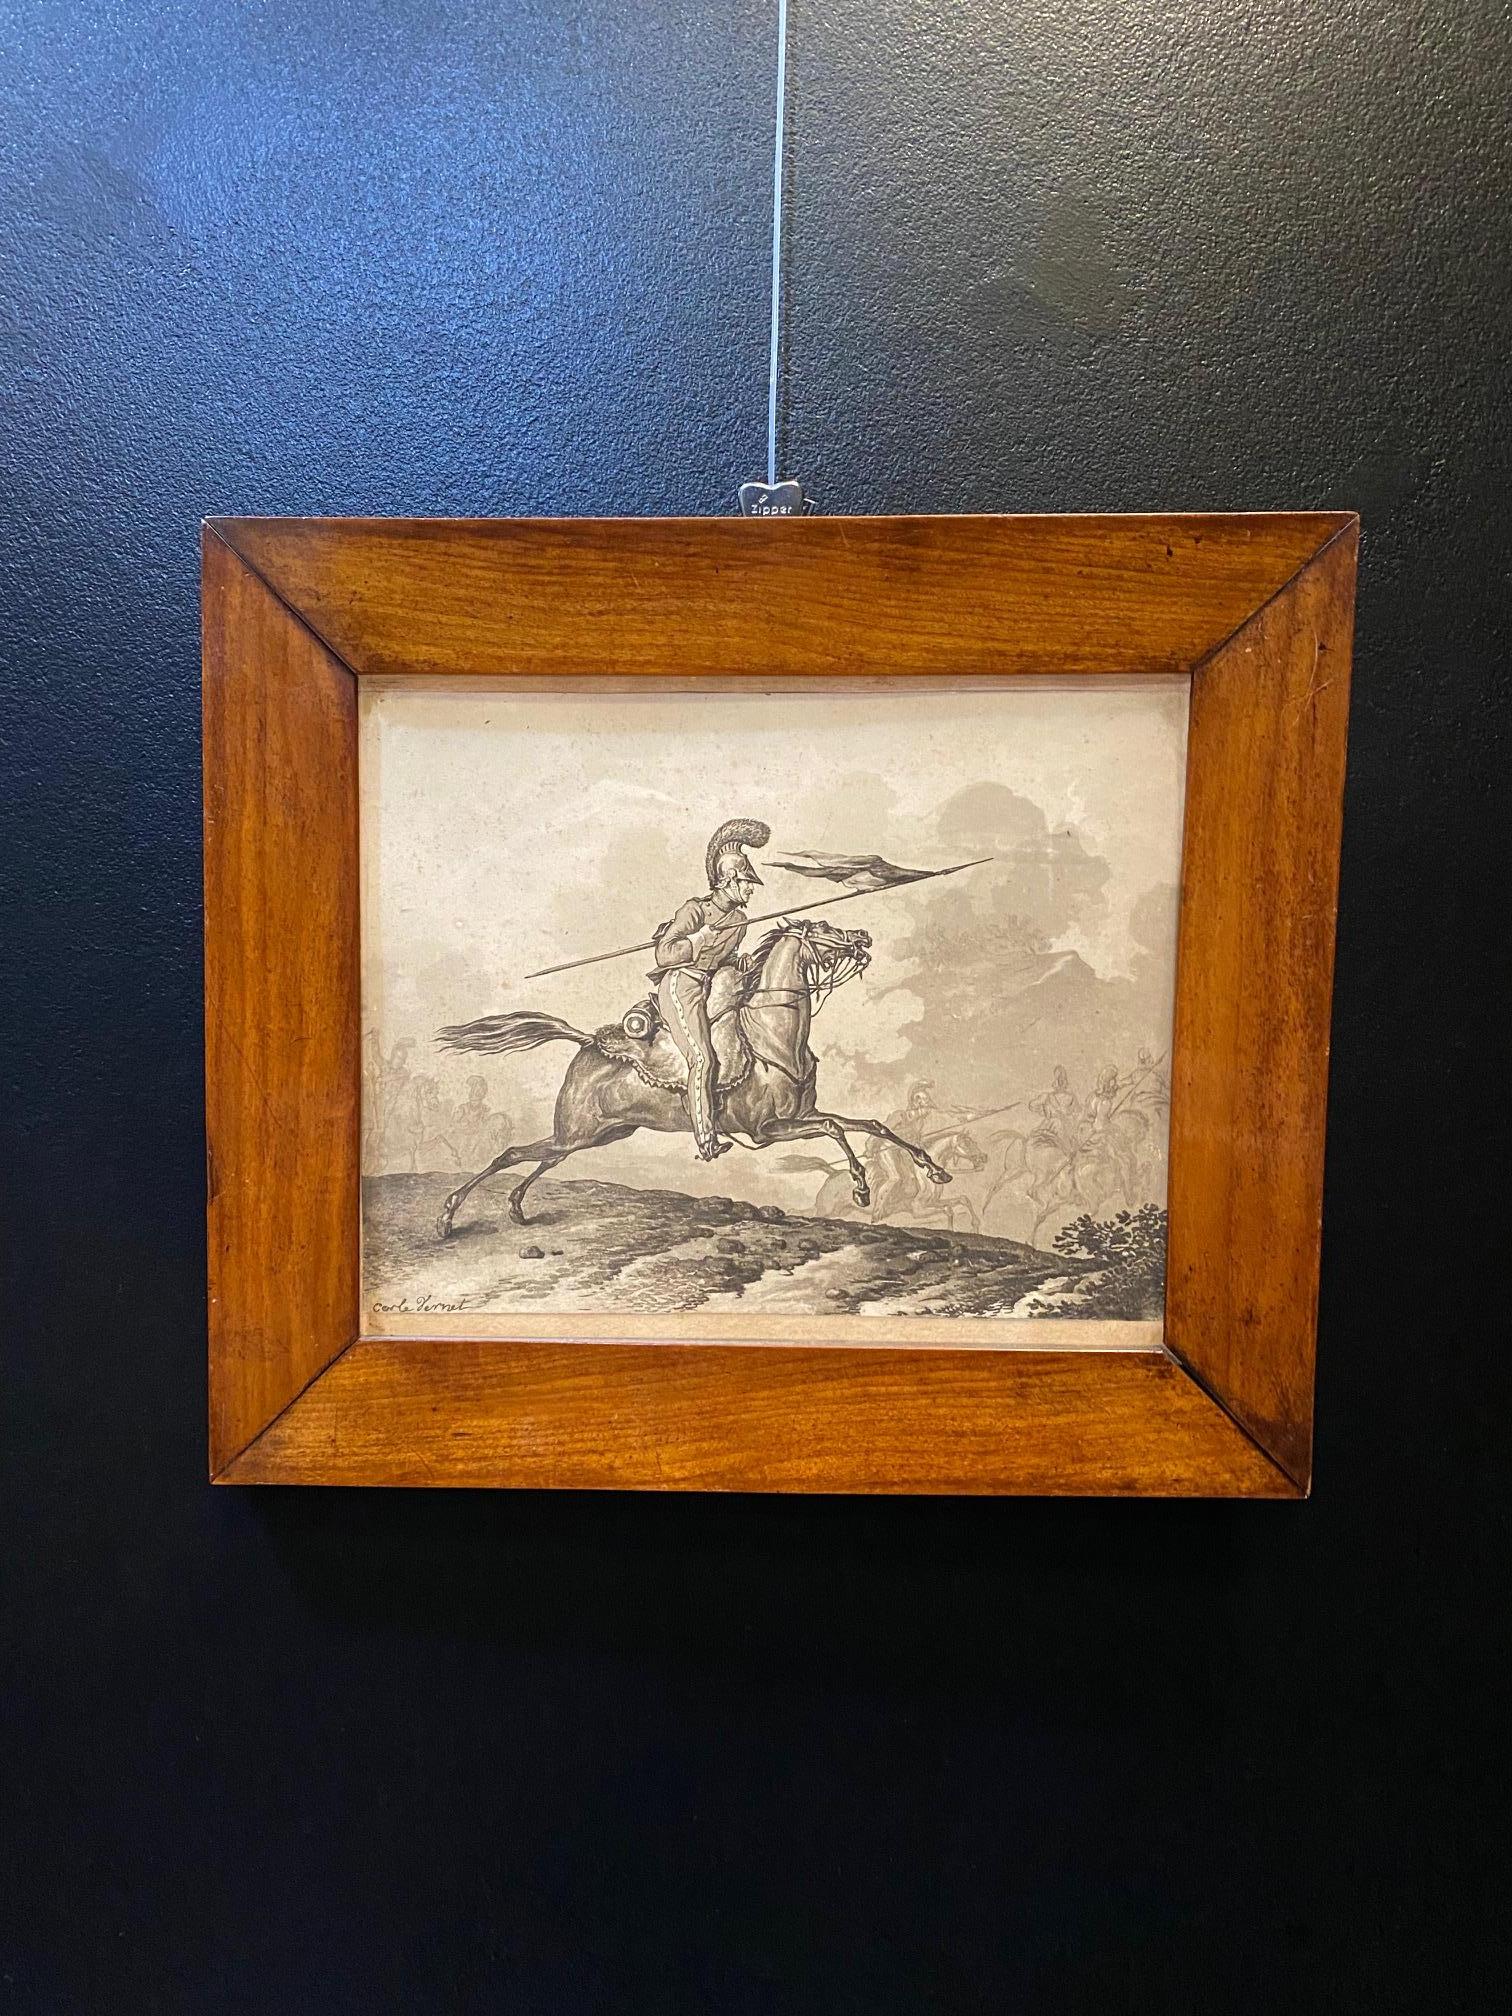 Galloping rider by Carle Vernet - Drawing on paper 25x30 cm - Realist Art by Carle Vernet (Antoine Charles Horace Vernet)